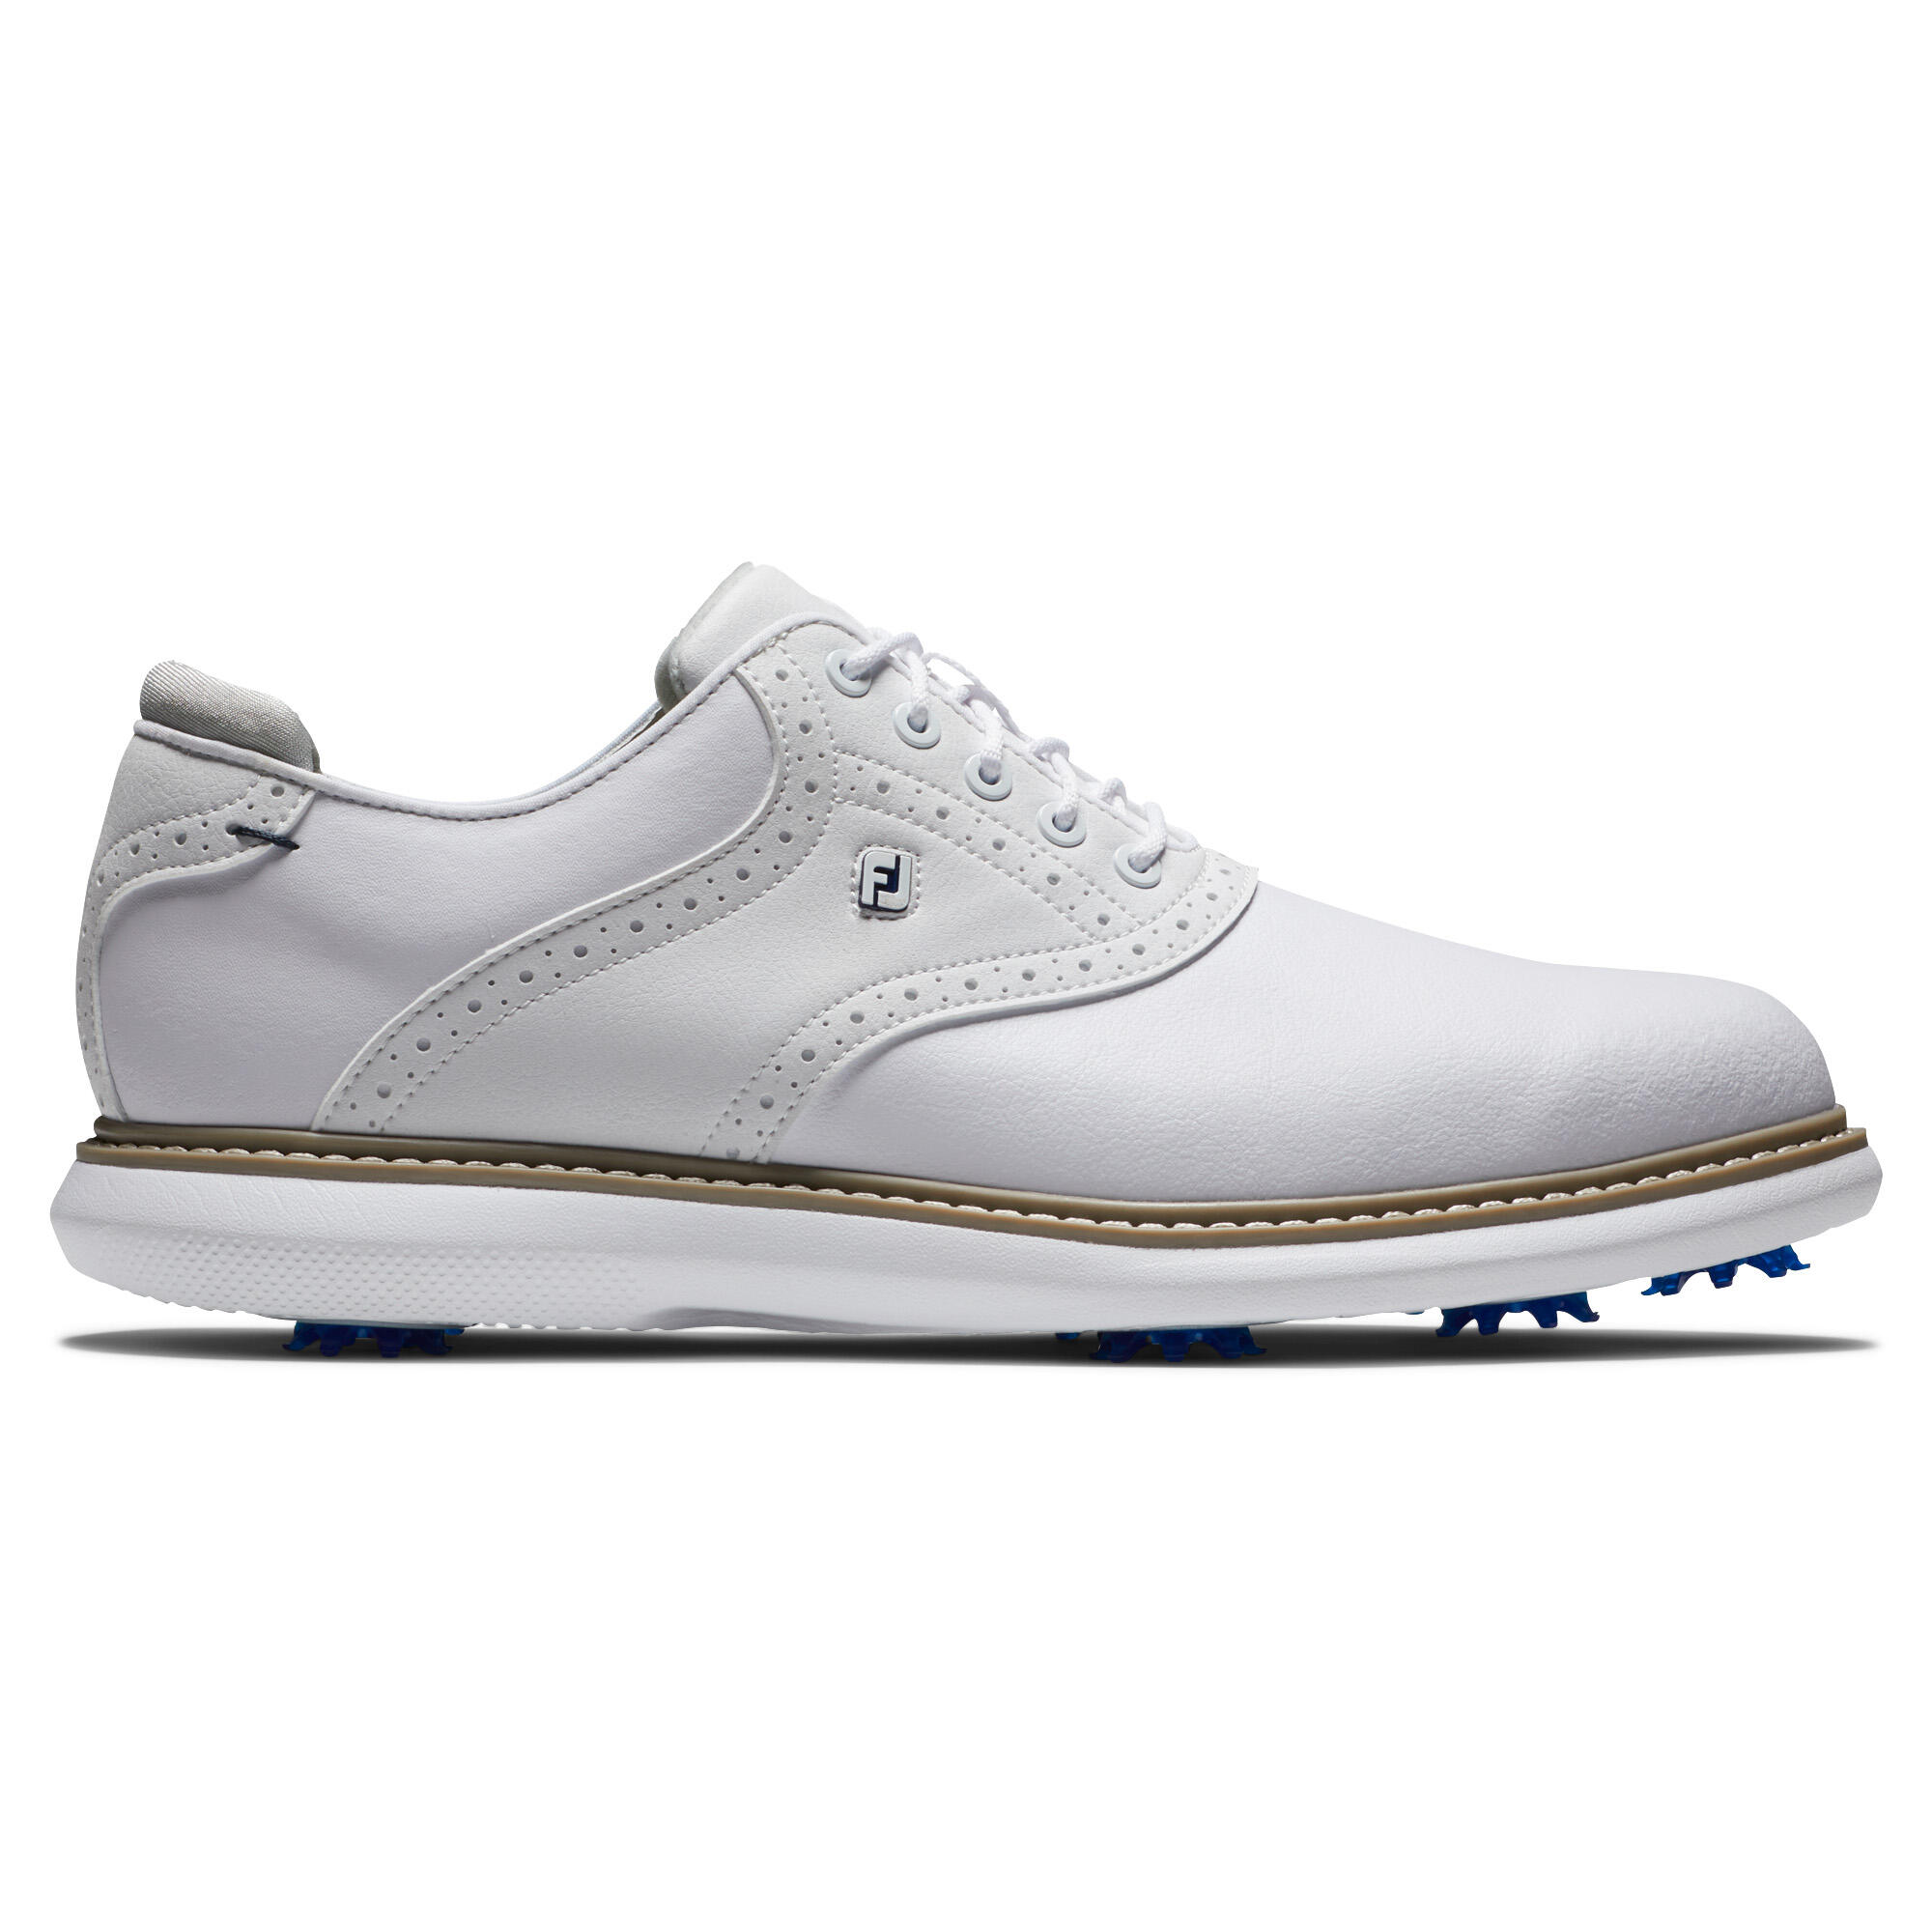 MEN'S GOLF SHOES FOOTJOY WATERPROOF - TRADITIONS WHITE 2/6